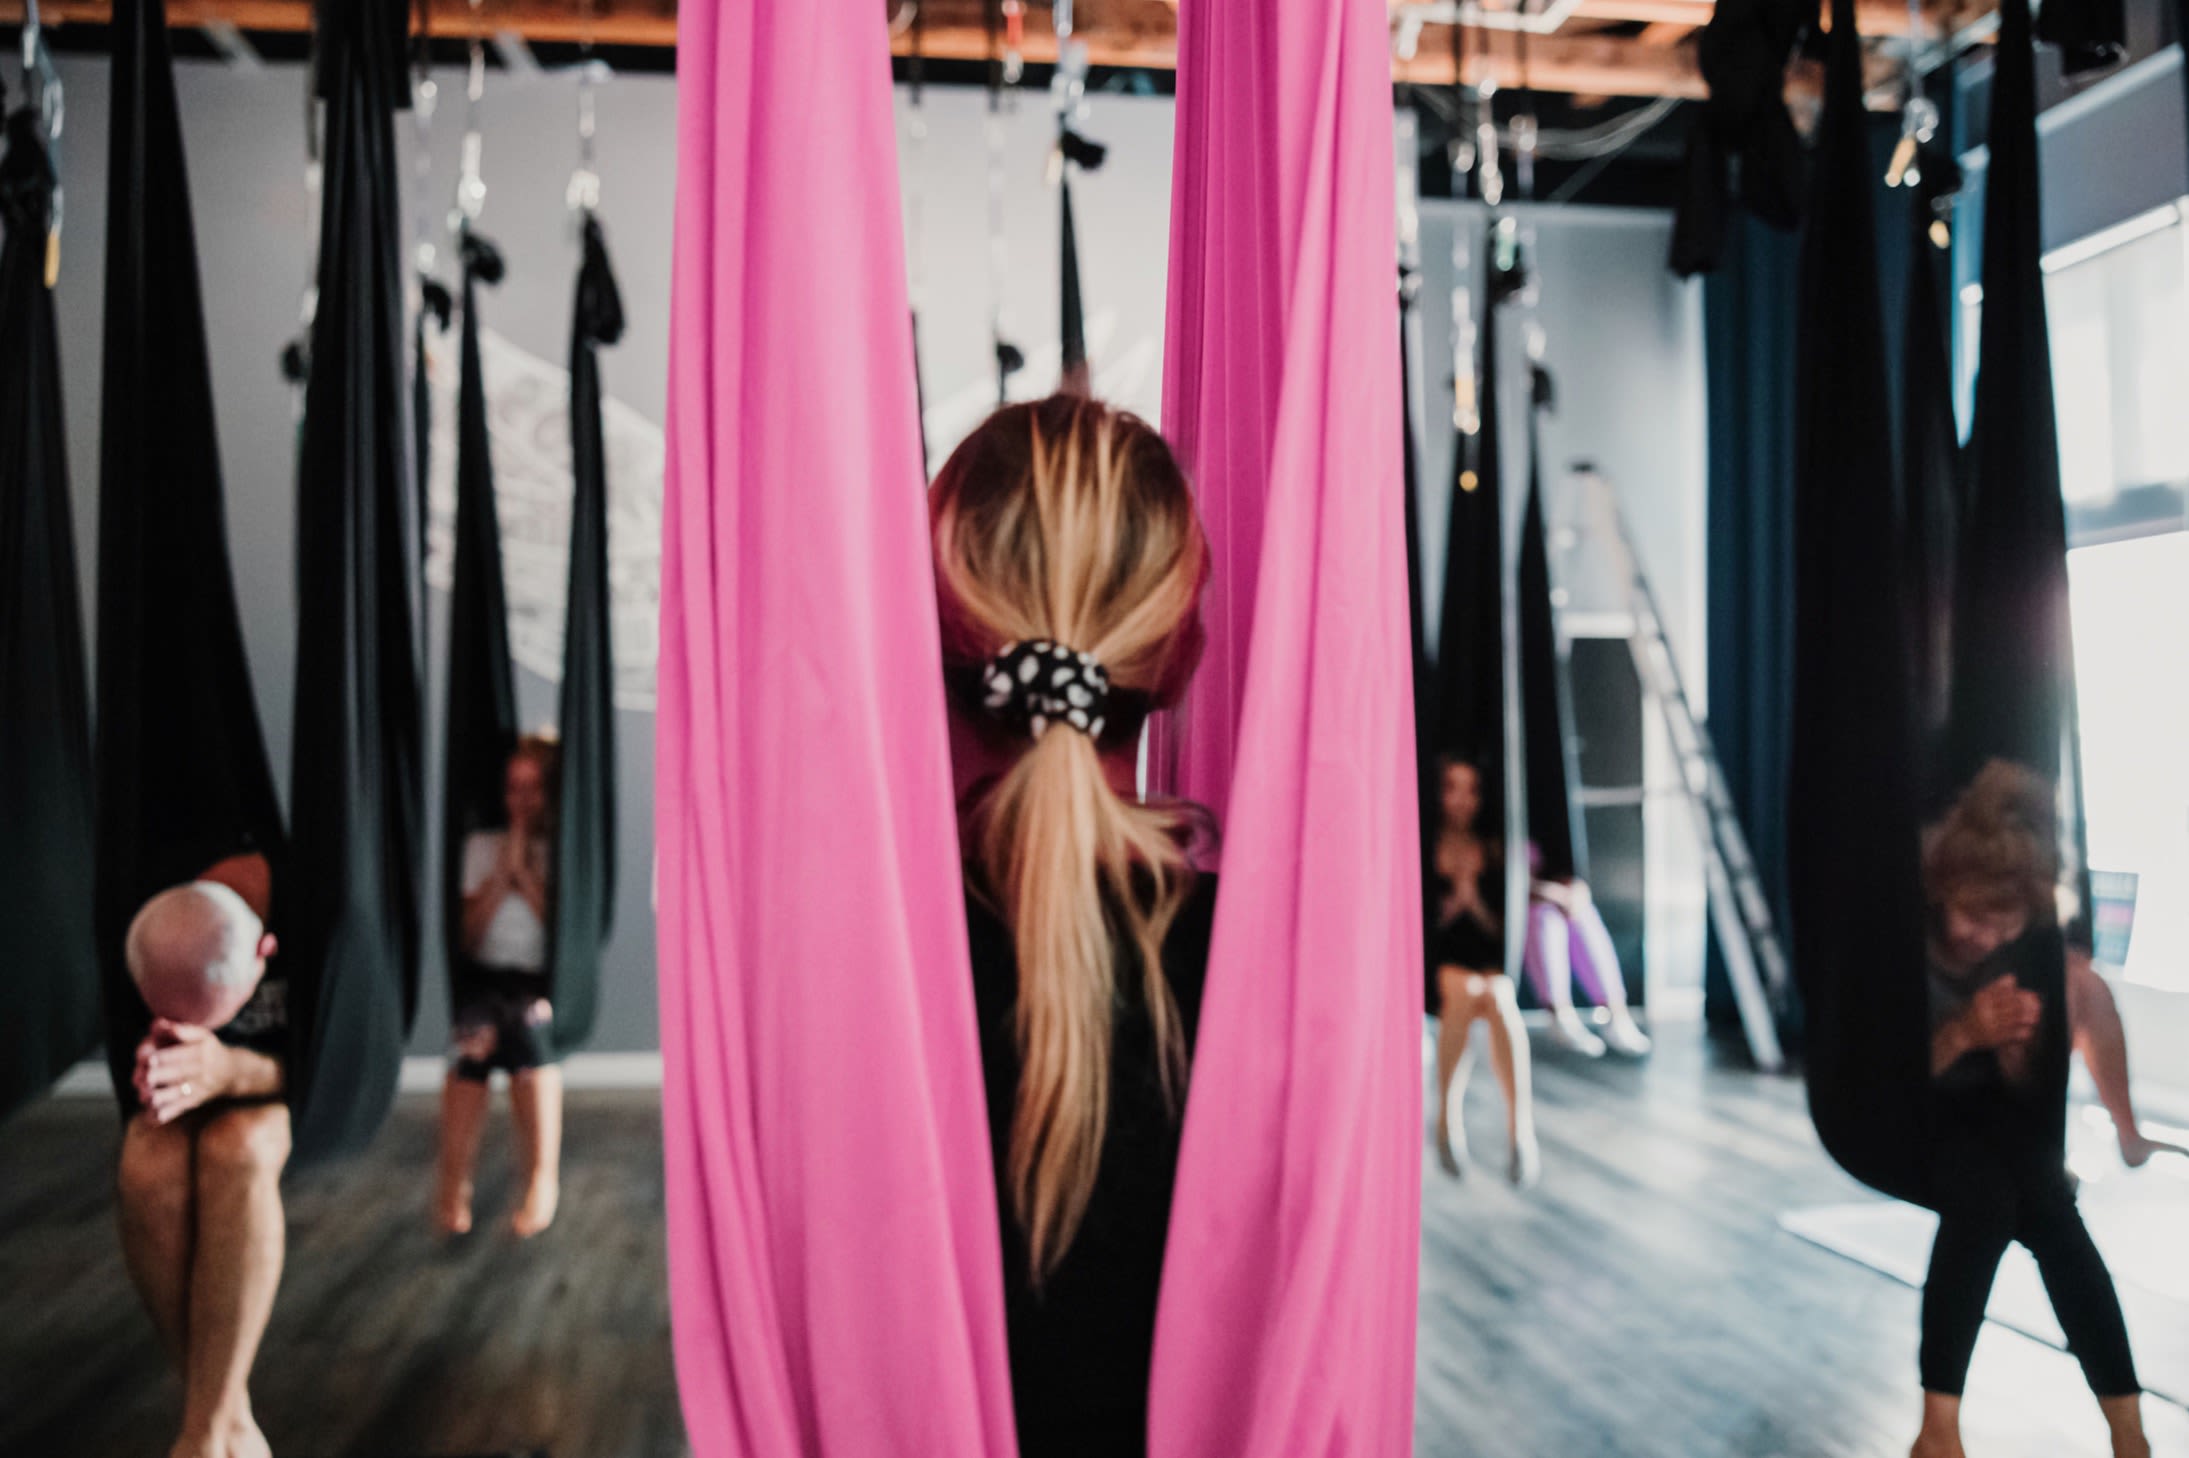 Arizona Yoga Co.: Read Reviews and Book Classes on ClassPass